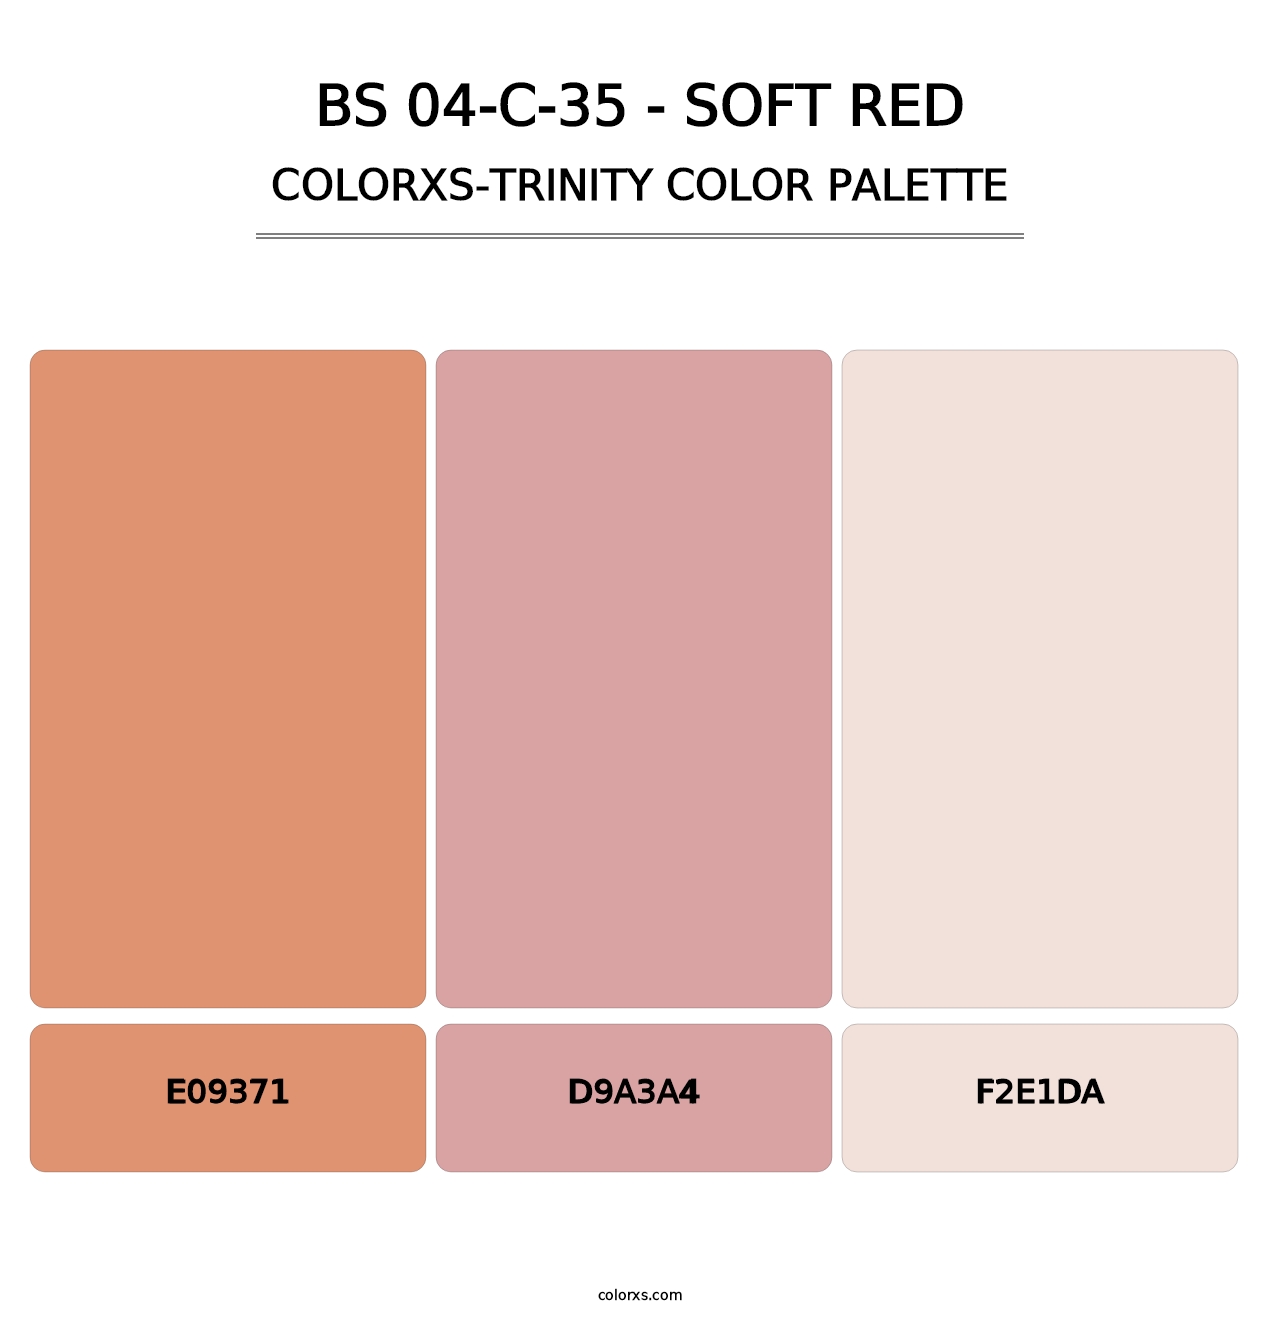 BS 04-C-35 - Soft Red - Colorxs Trinity Palette